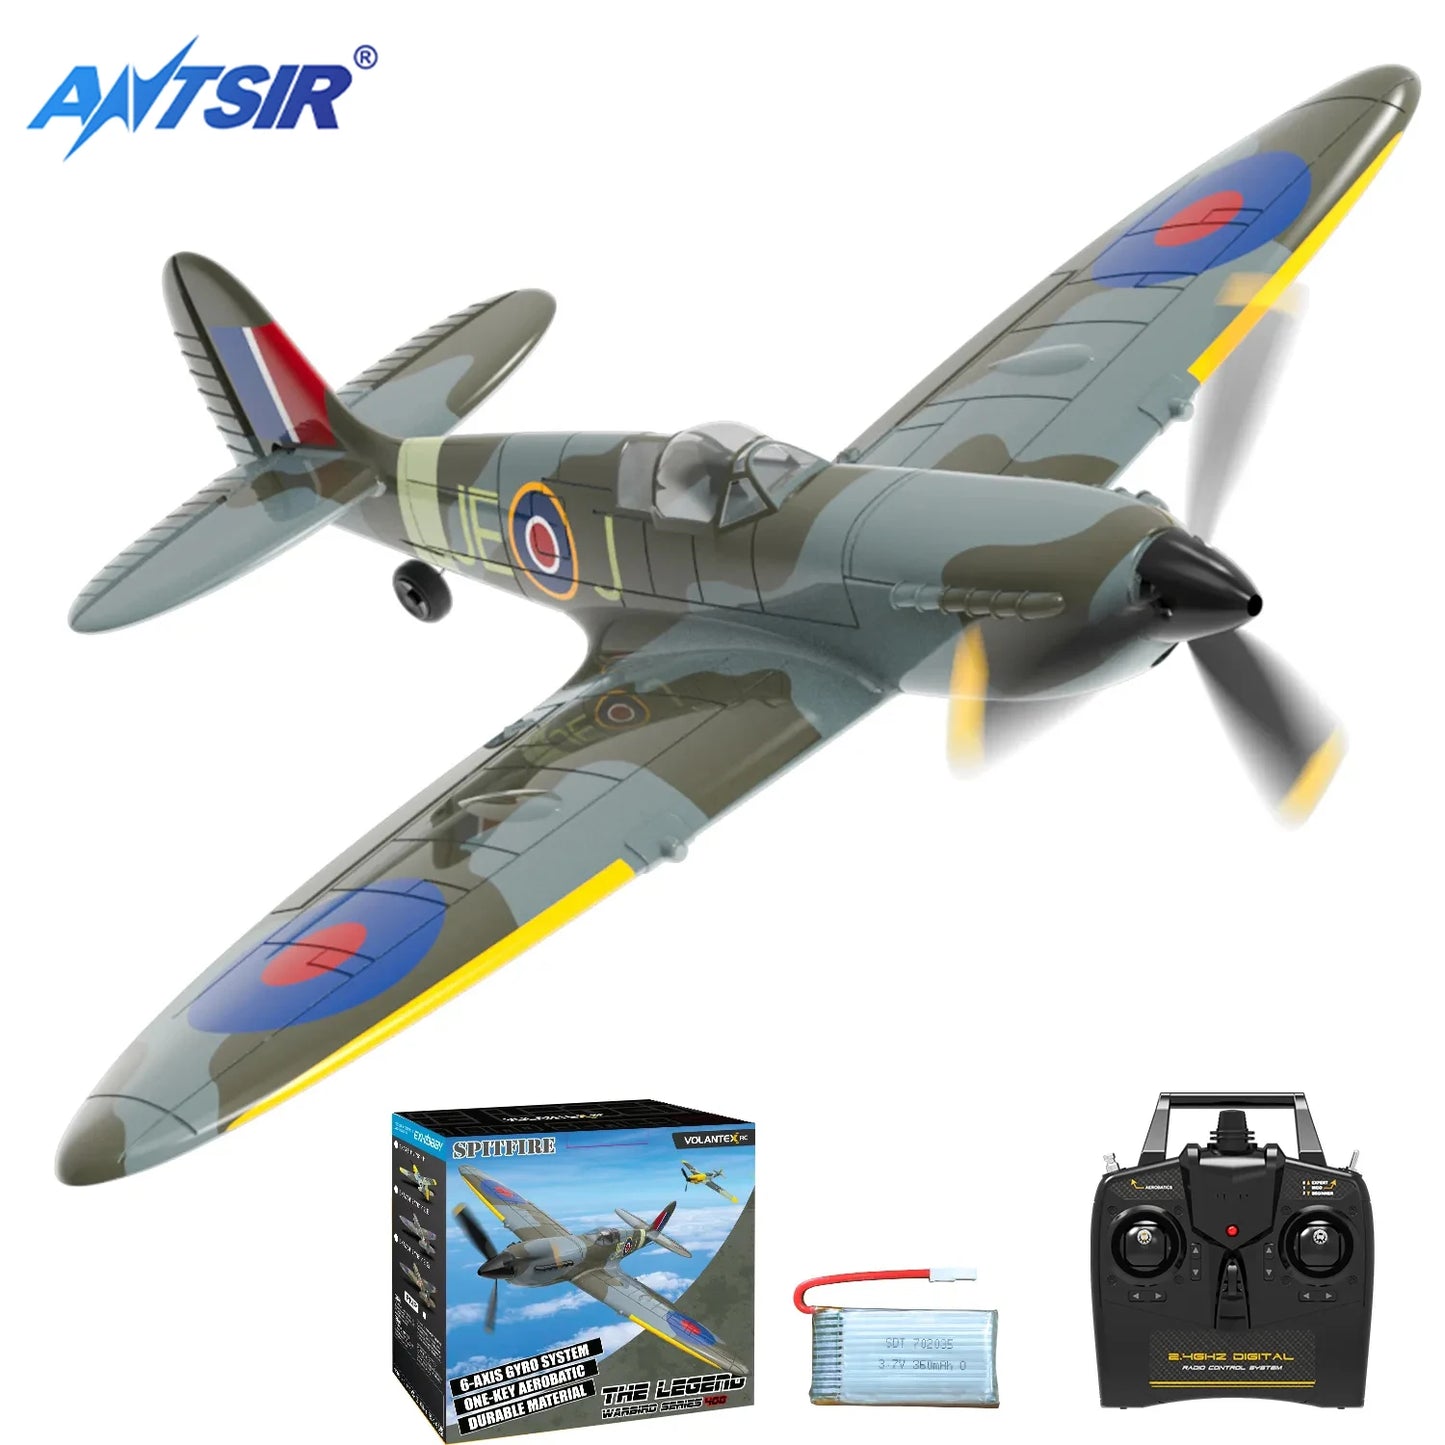 Volantex Spitfire RC Plane EPP 400mm Wingspan Aerobatic Fighter Warbird - Ready-to-Fly 2.4G 4CH Outdoor Aircraft